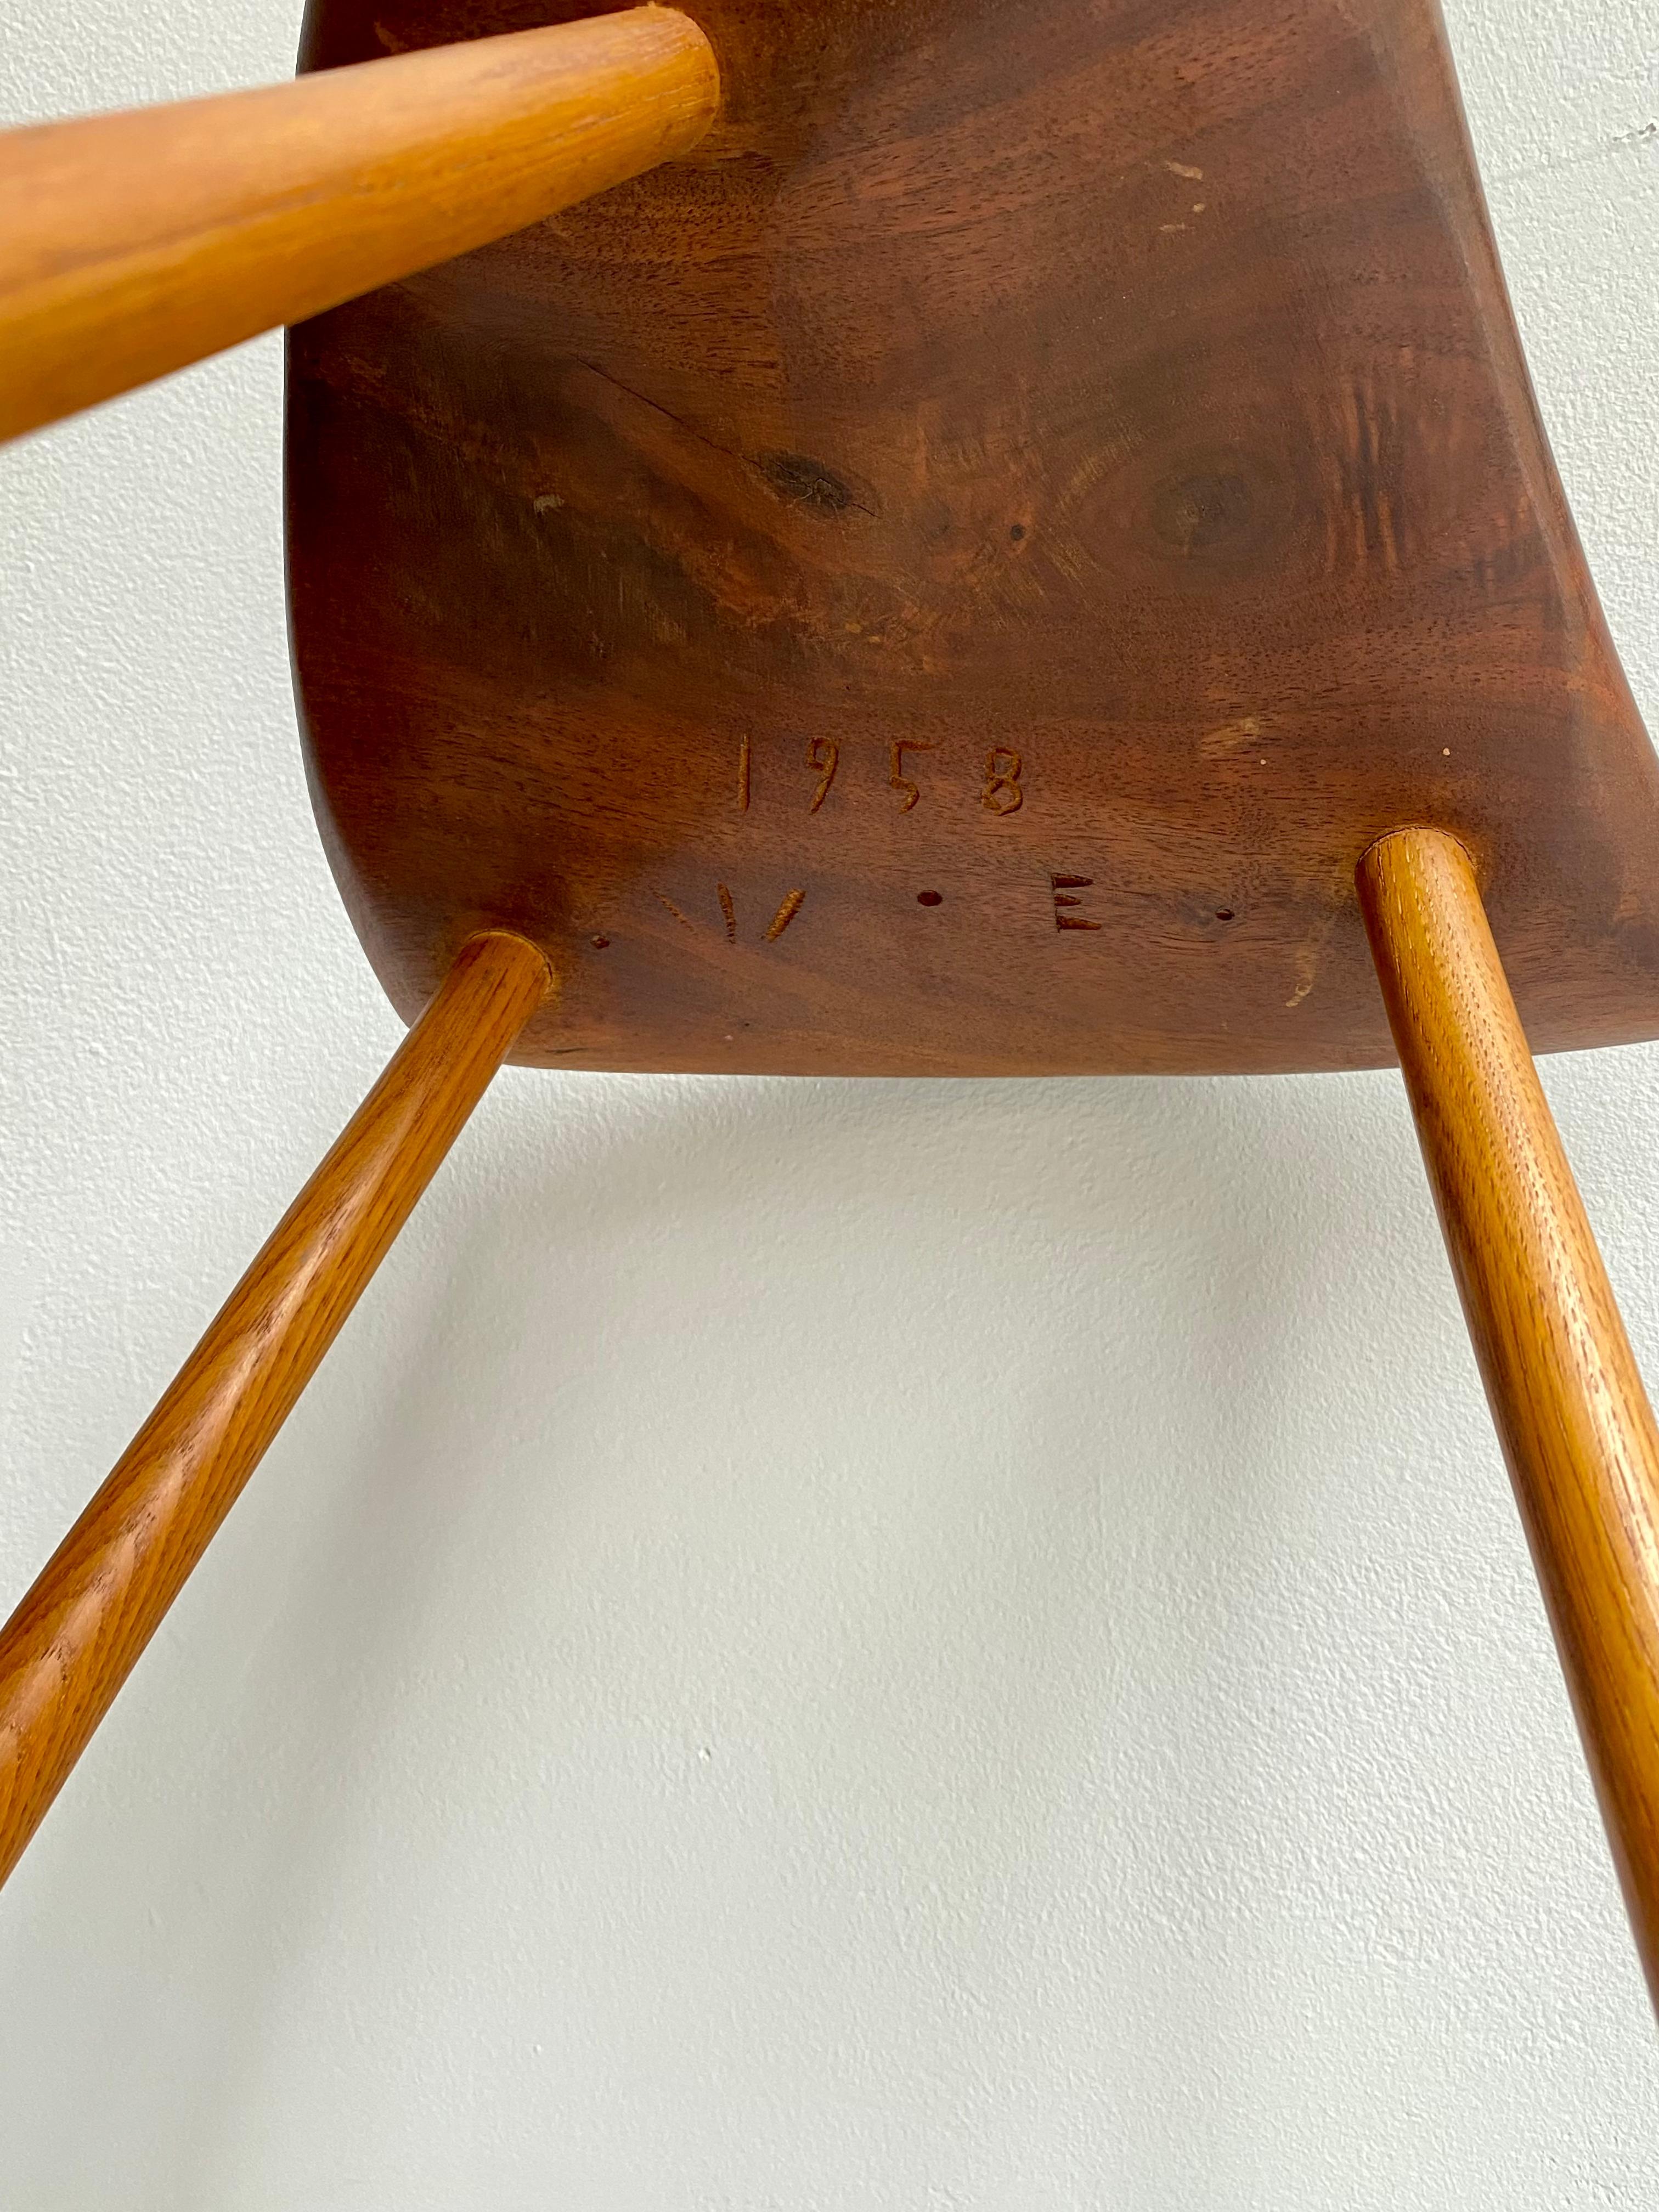 Wharton Esherick, Freeform Stool, 1958 In Excellent Condition For Sale In New York, NY